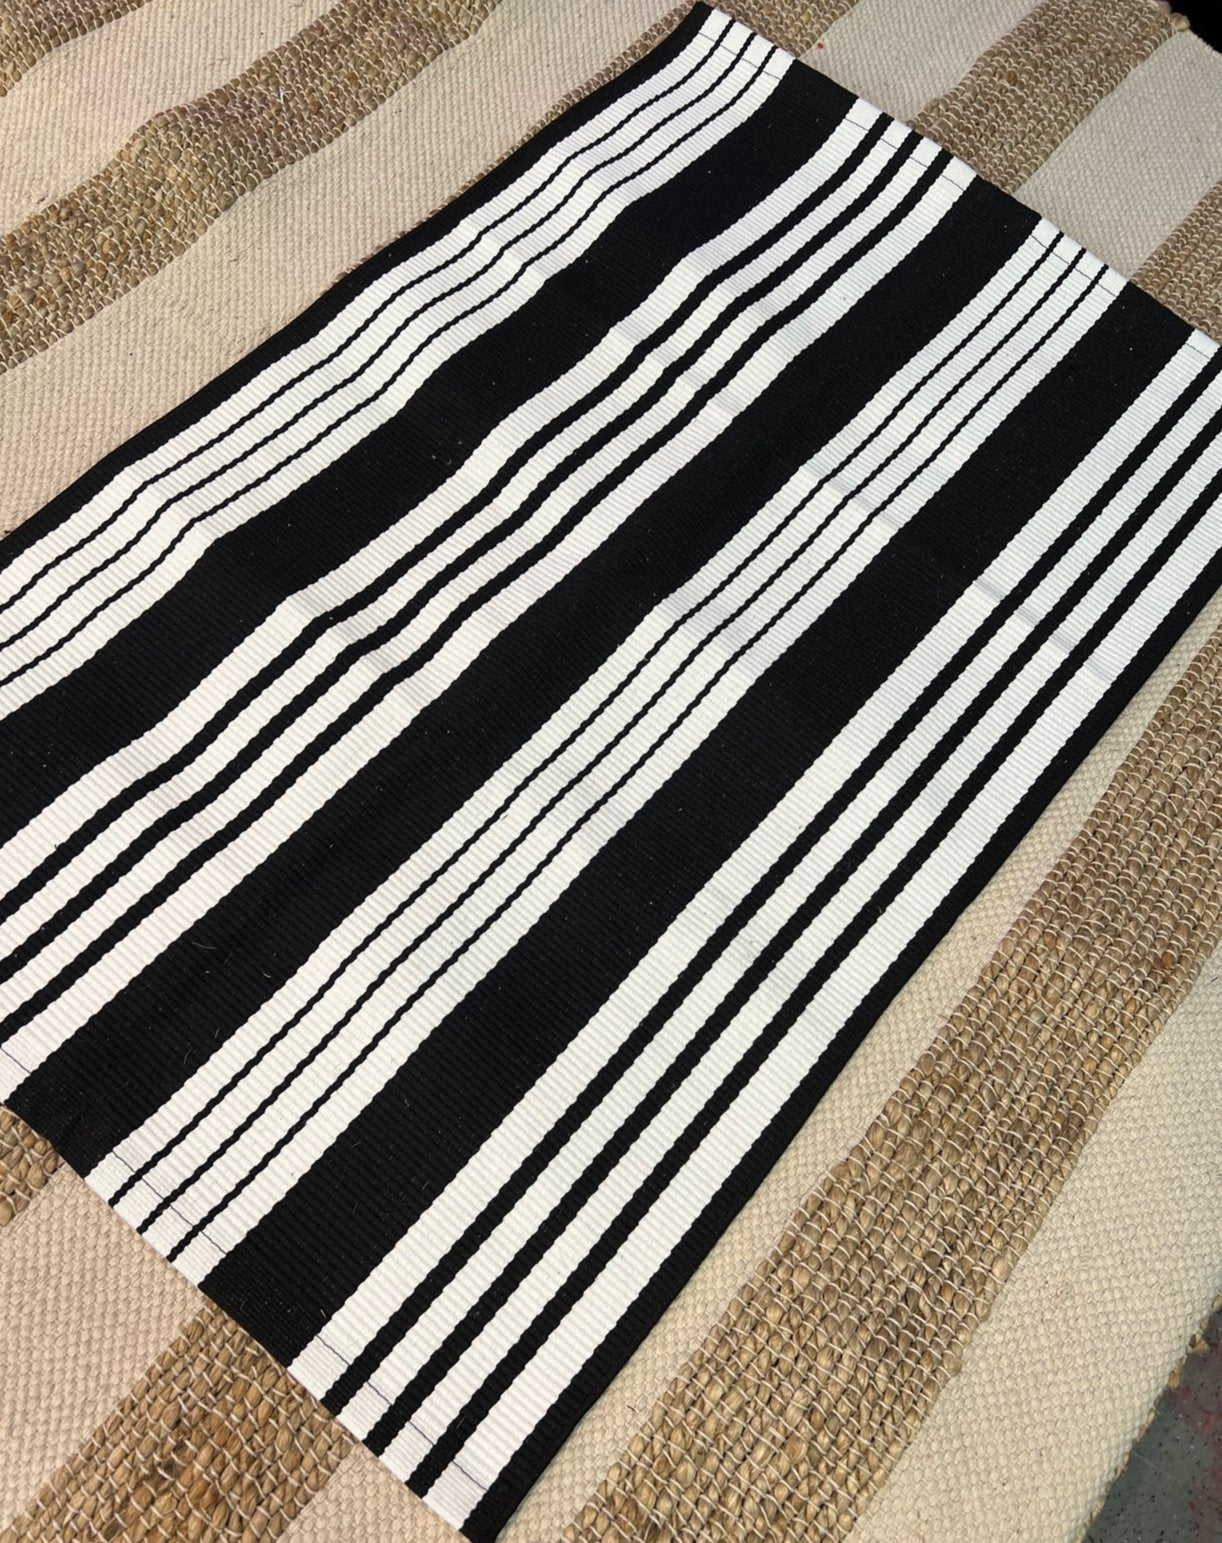 Black and White Stripe - Self Checkout at Creative Collab Collection - Miss Molly Designs, LLC